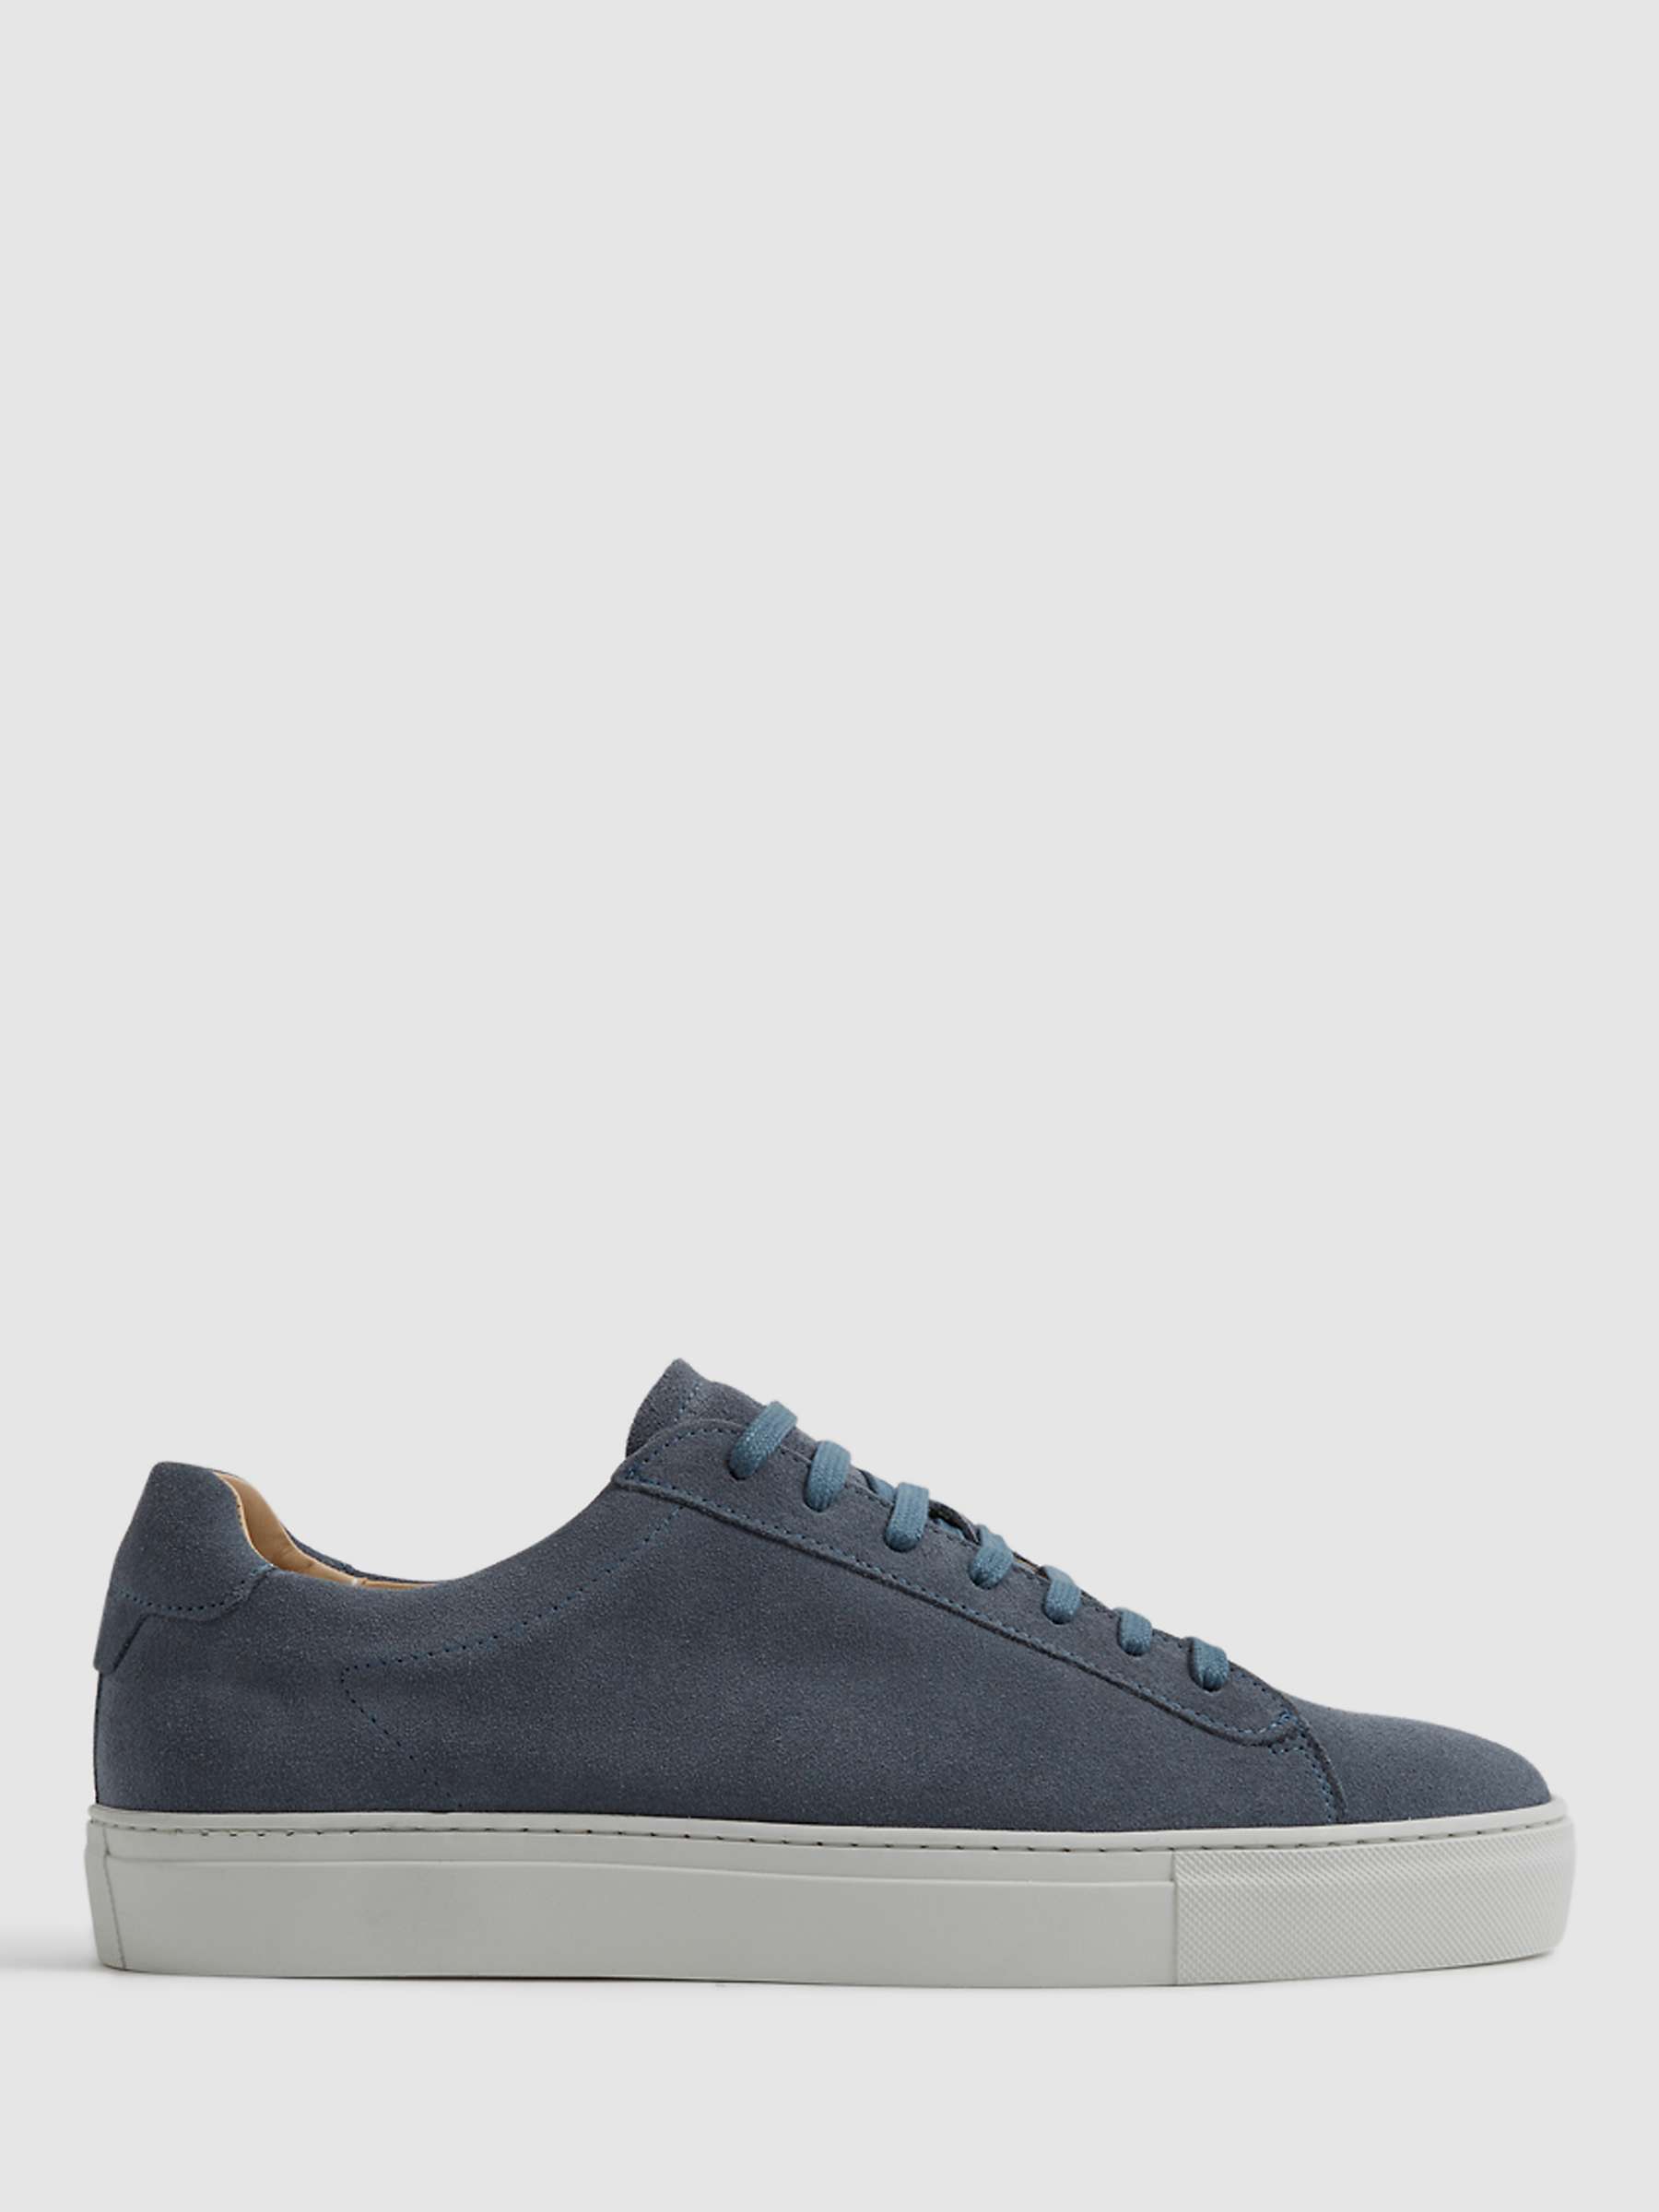 Reiss Finley Suede Trainers, Airforce Blue at John Lewis & Partners